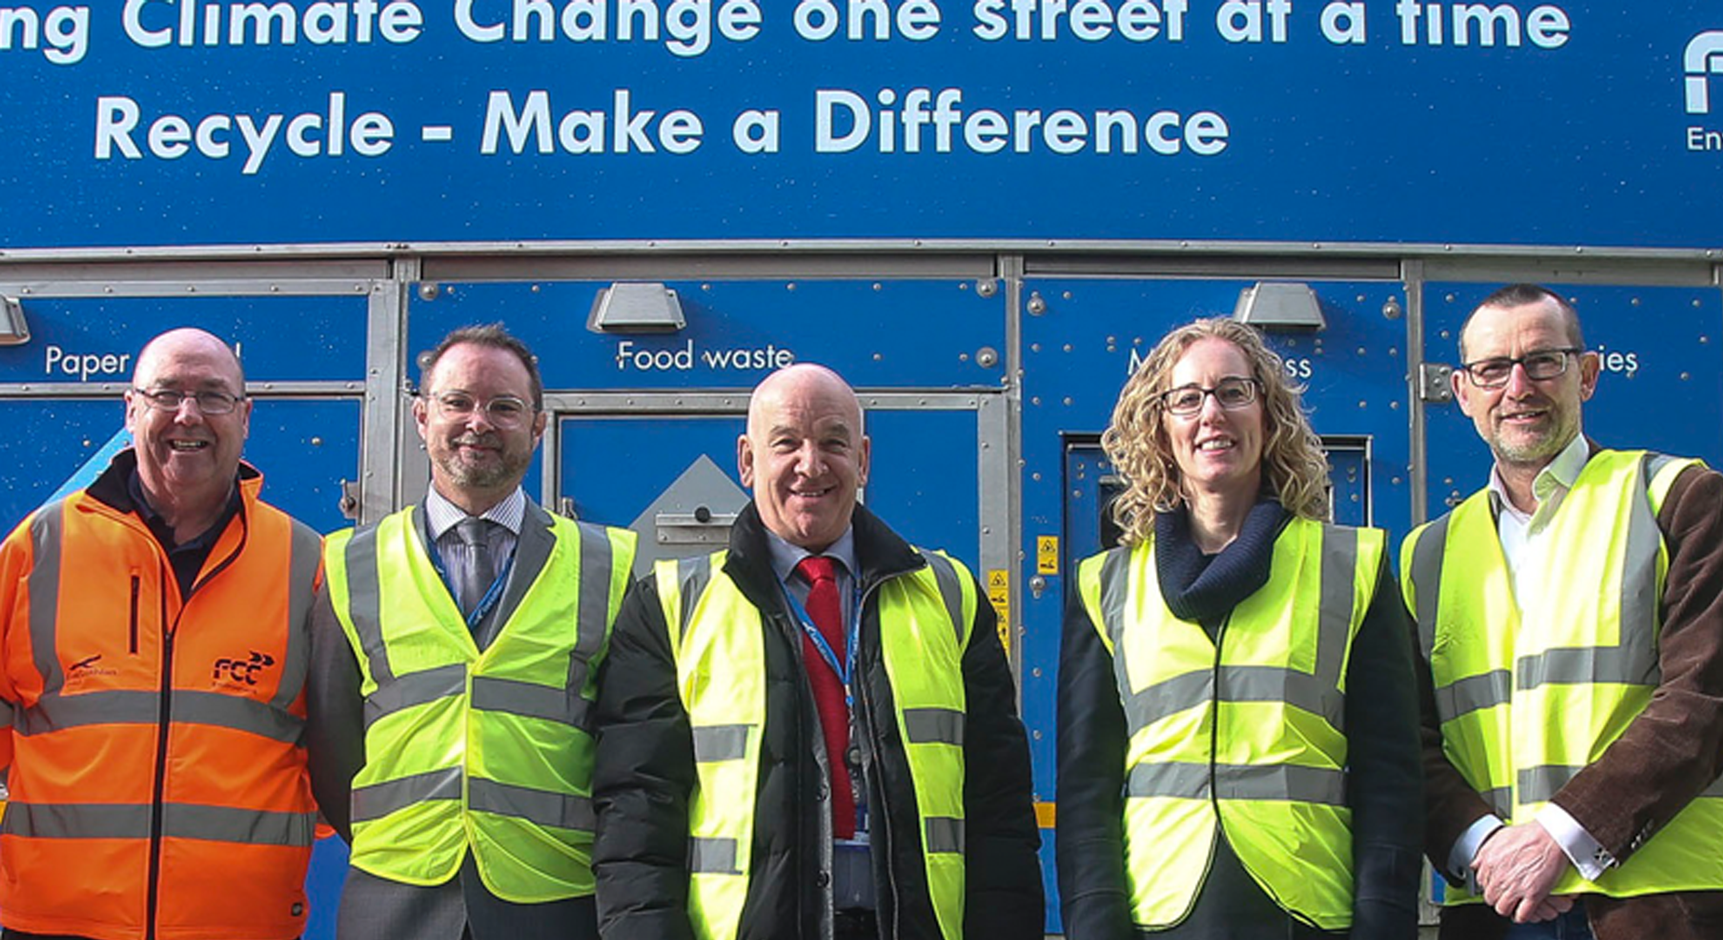 Members of the Scottish Government, Zero Waste Scotland and Local Authorities at the launch of the Recycling Improvement Fund